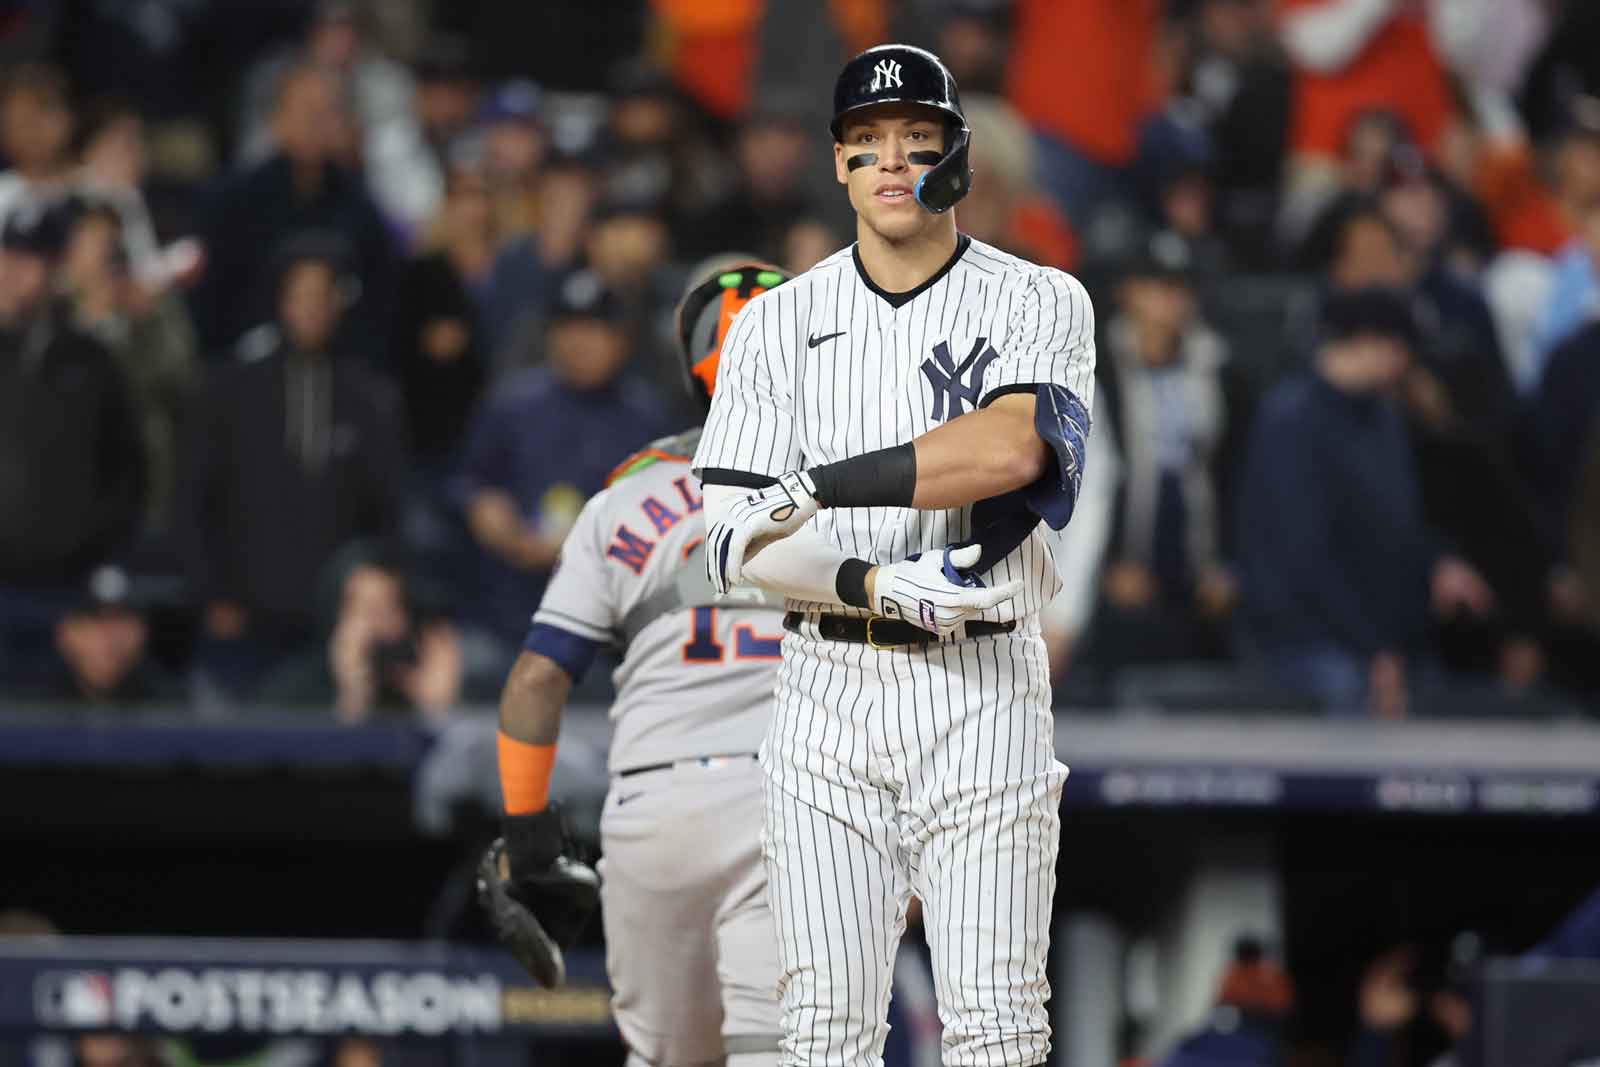 Aaron Judge, Yankees Reportedly Agree to 9-Year, $360M Contract